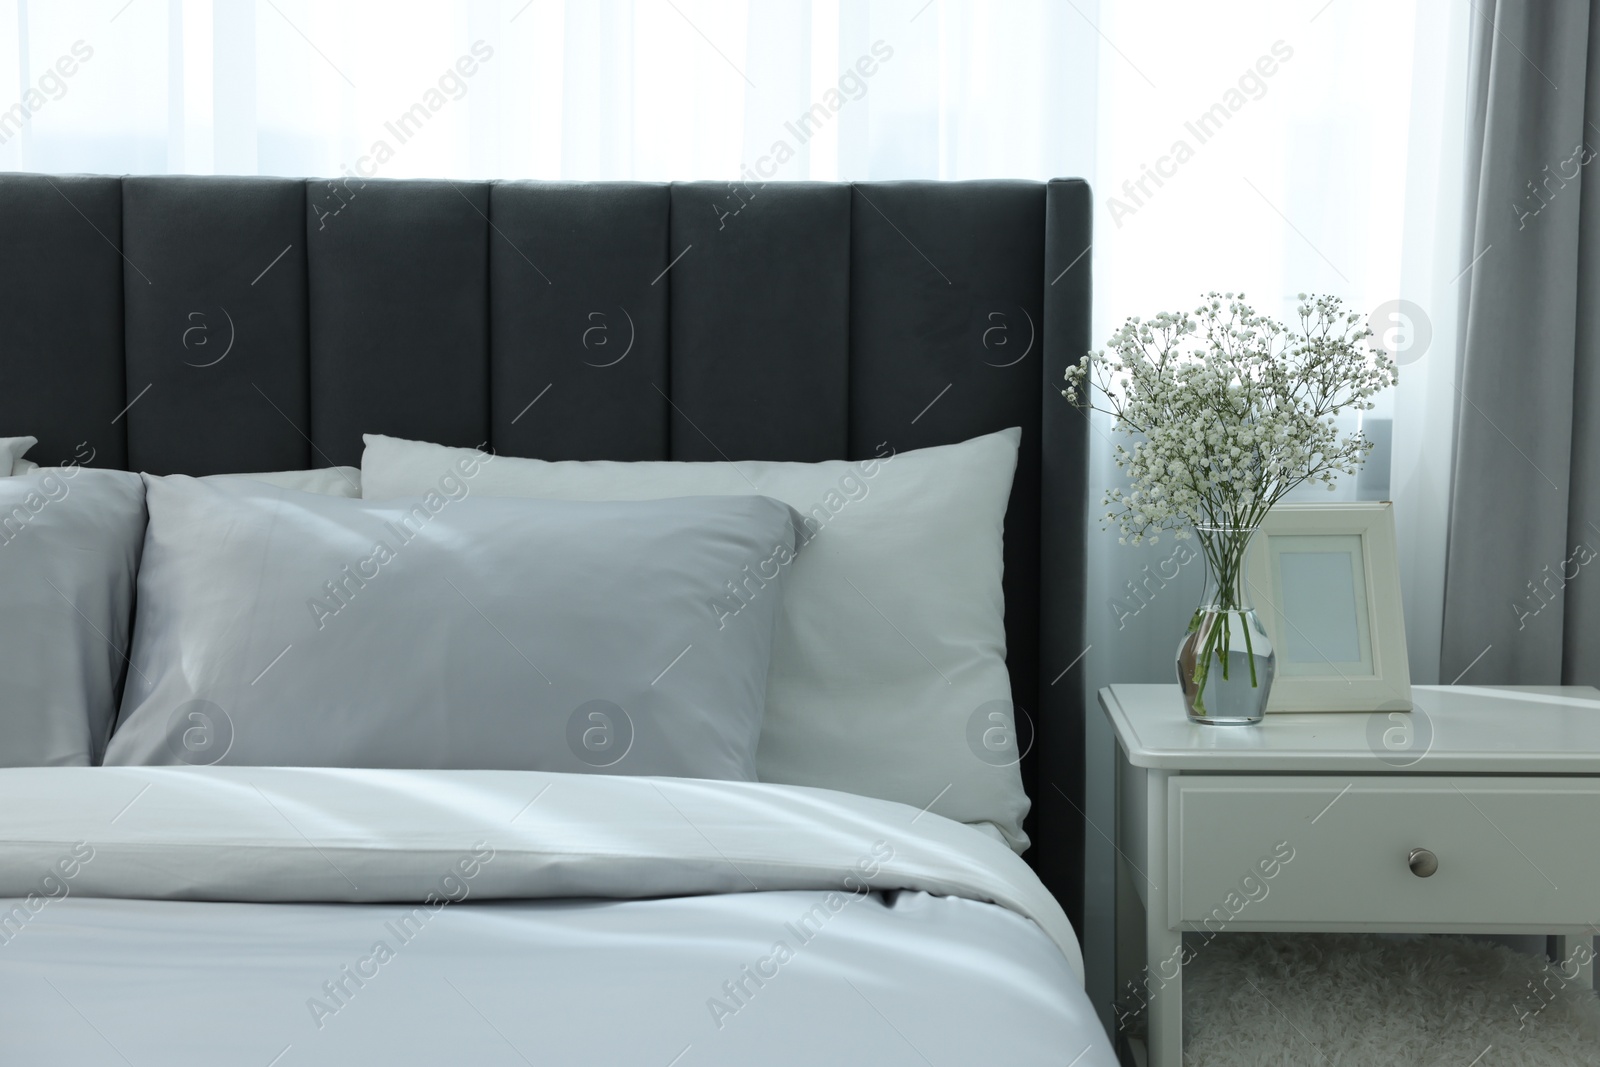 Photo of Vase with beautiful flowers on white nightstand and comfortable bed in room. Stylish interior